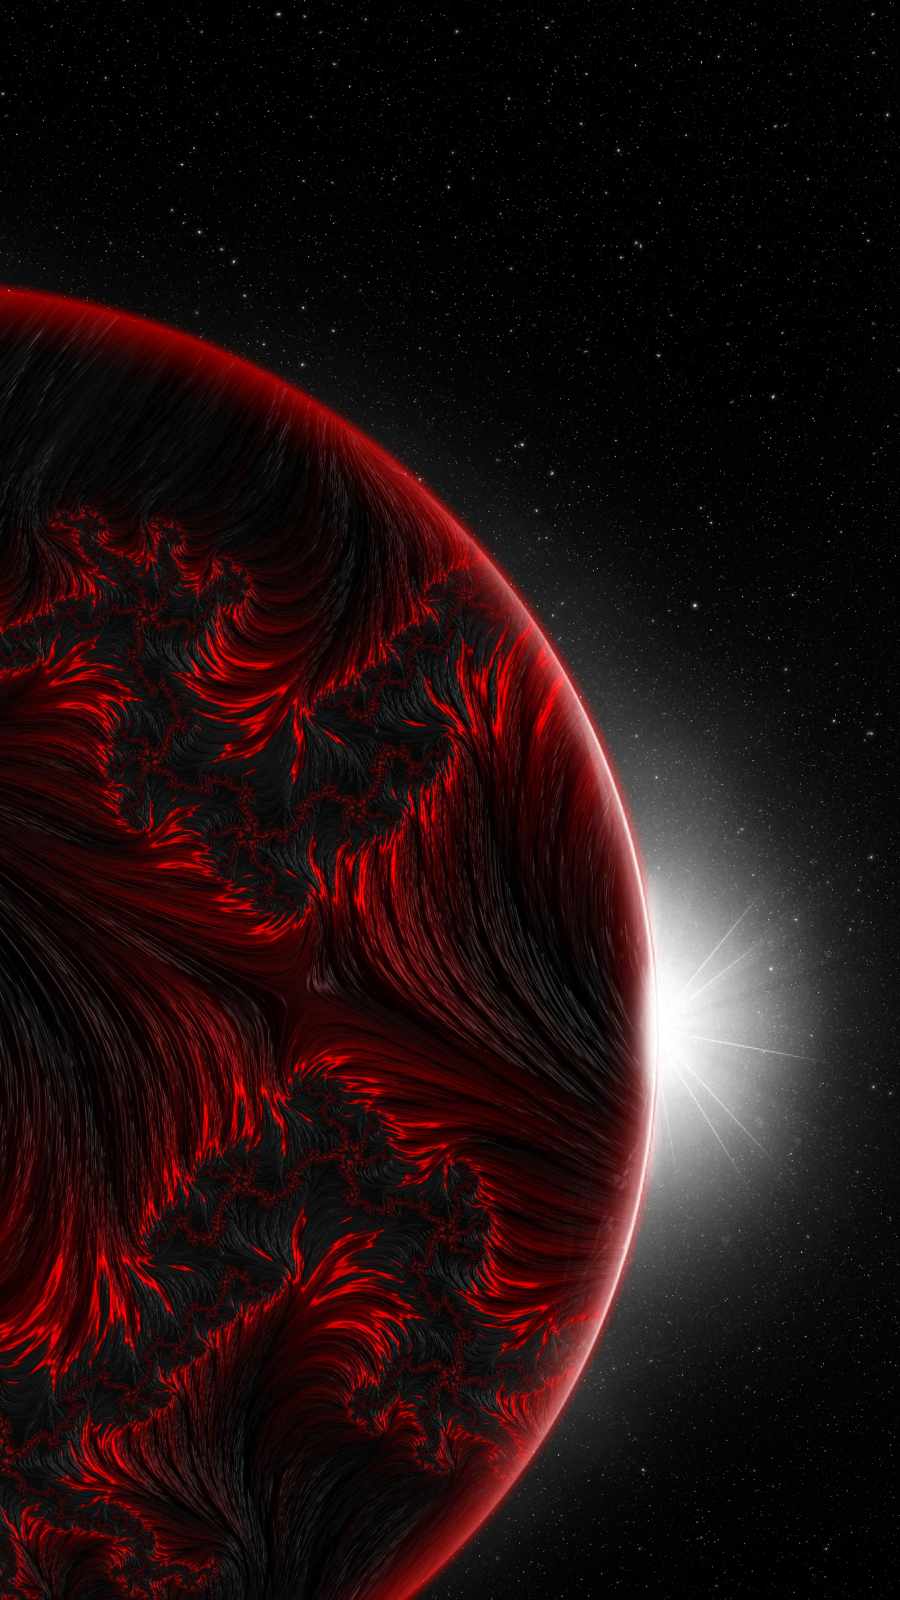 Red Planet IPhone Wallpaper - IPhone Wallpapers : iPhone Wallpapers